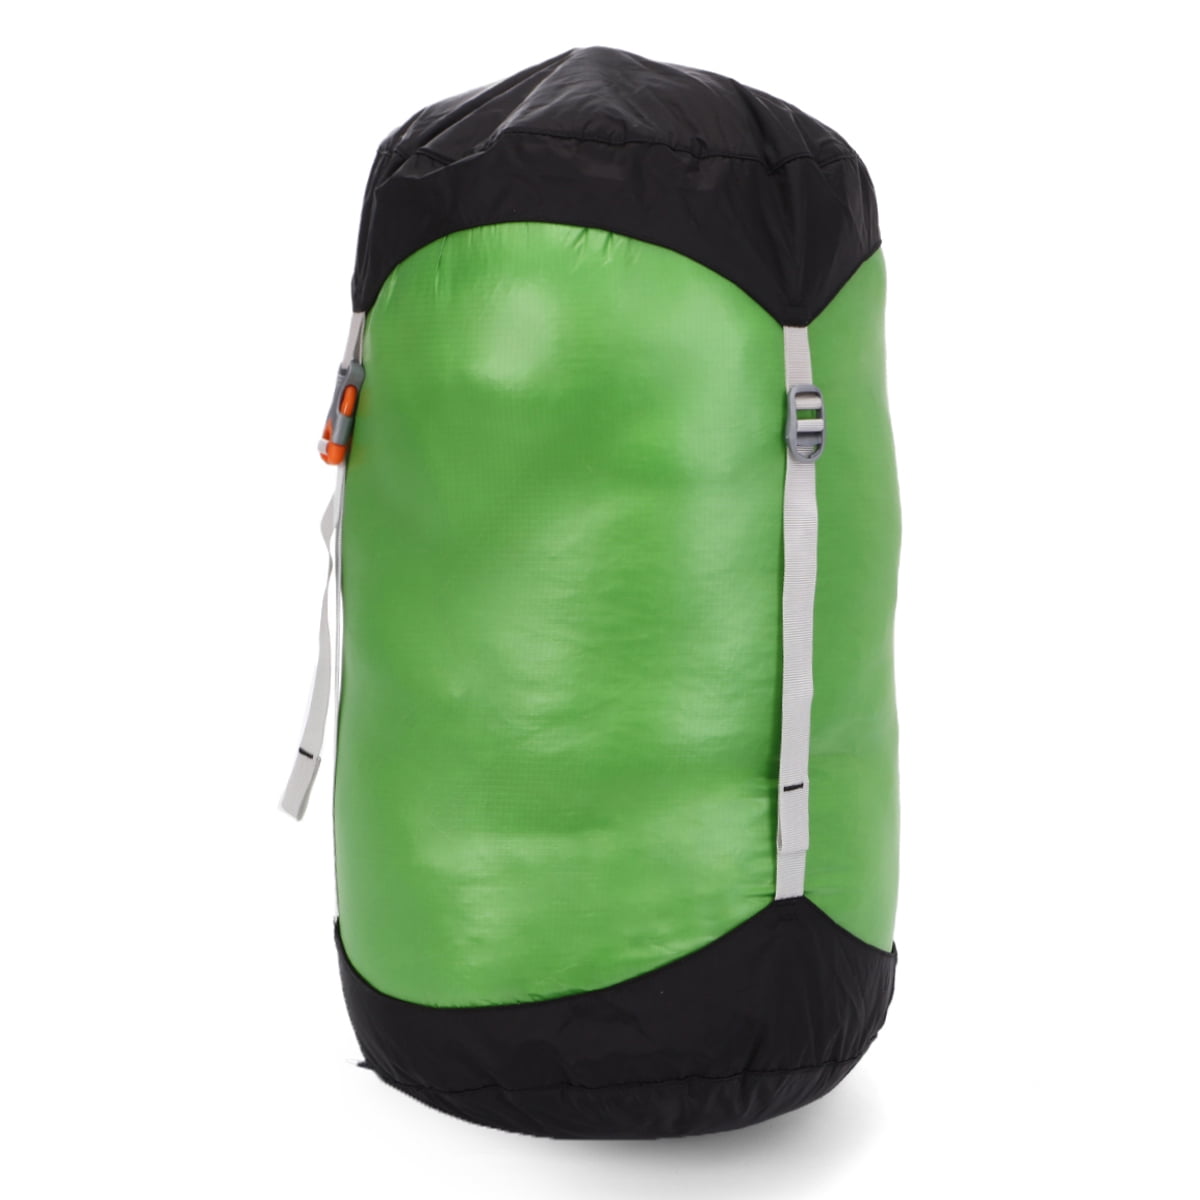 Details about   6x Waterproof Dry Bag Backpack Gym Sack Travel Storage Bag Sport Camping Hiking 